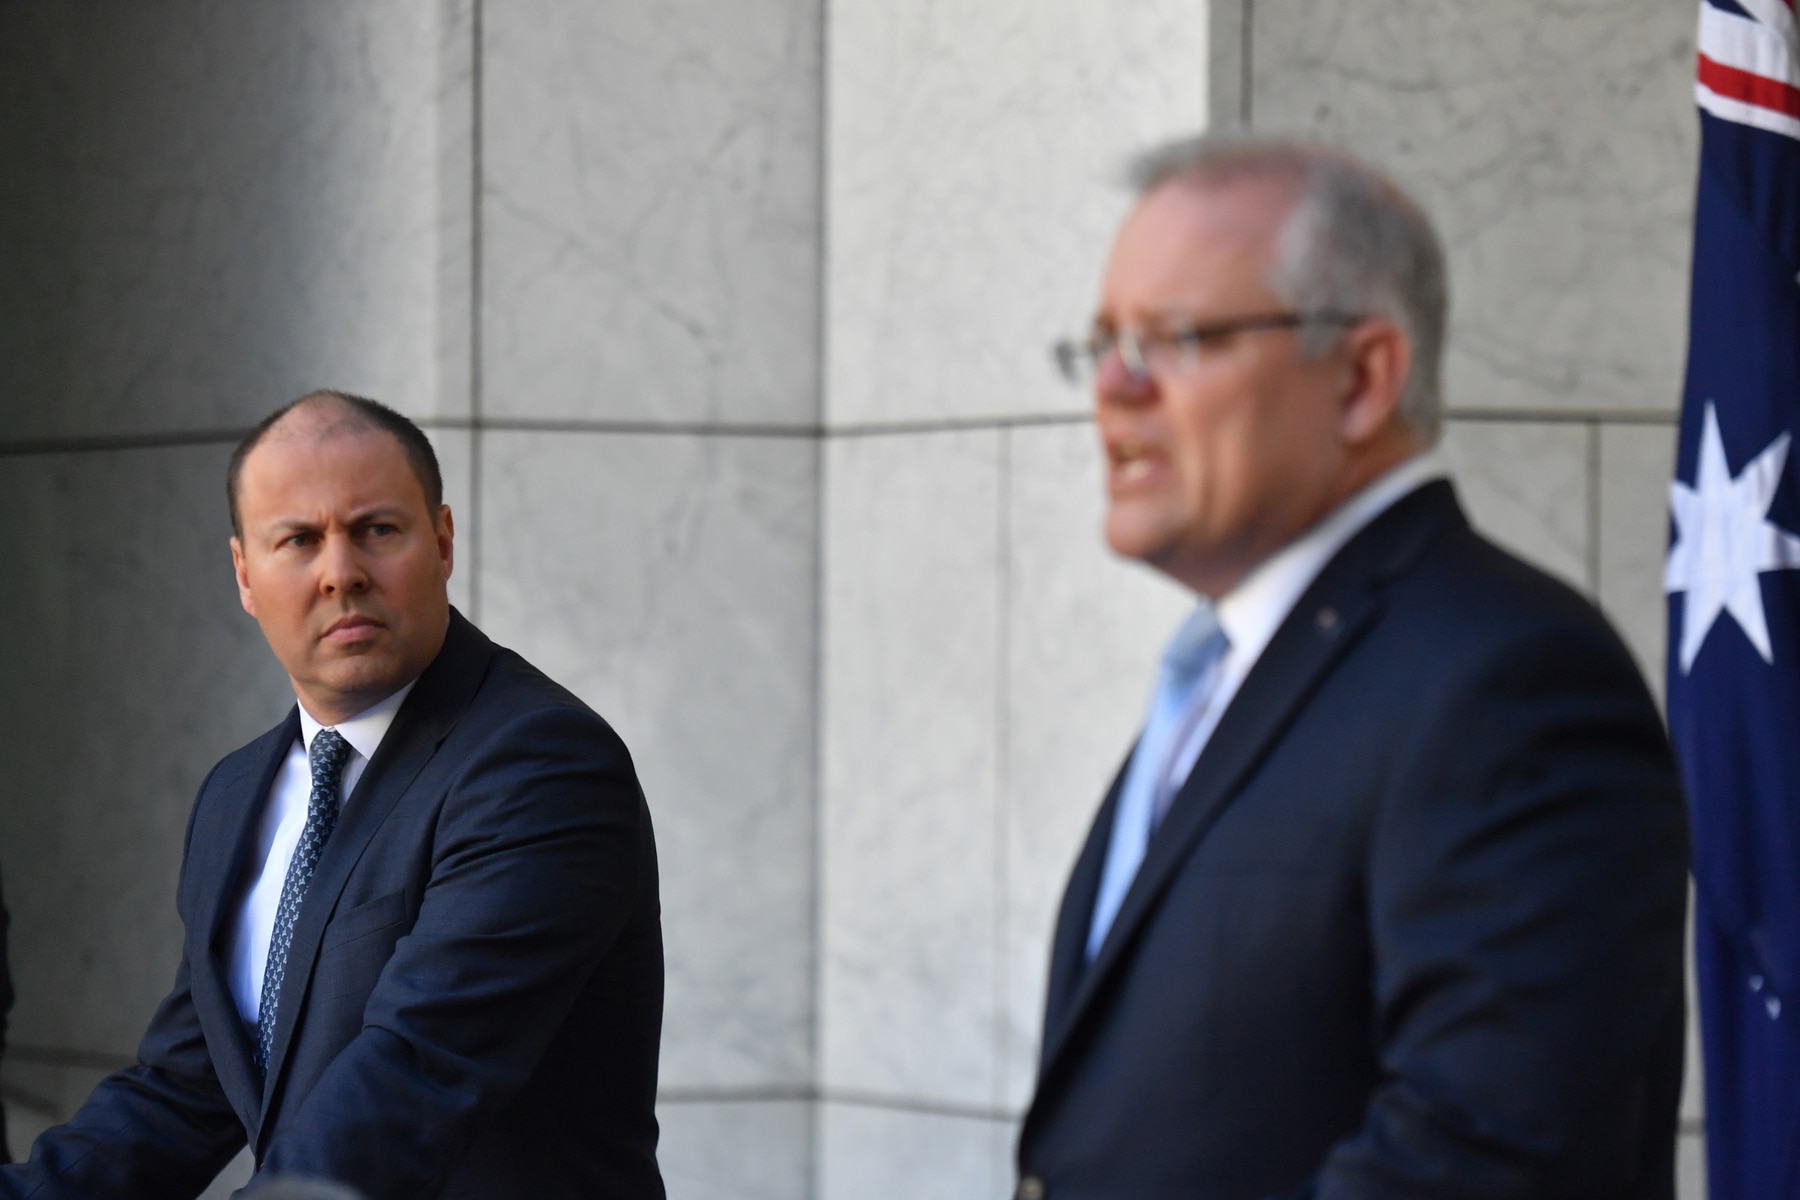 Treasurer Josh Frydenberg and Prime Minister Scott Morrison at a press conference to announce the government's coronavirus stimulus package at Parliament House in Canberra, Sunday, March 22, 2020. (AAP Image/Mick Tsikas) NO ARCHIVING